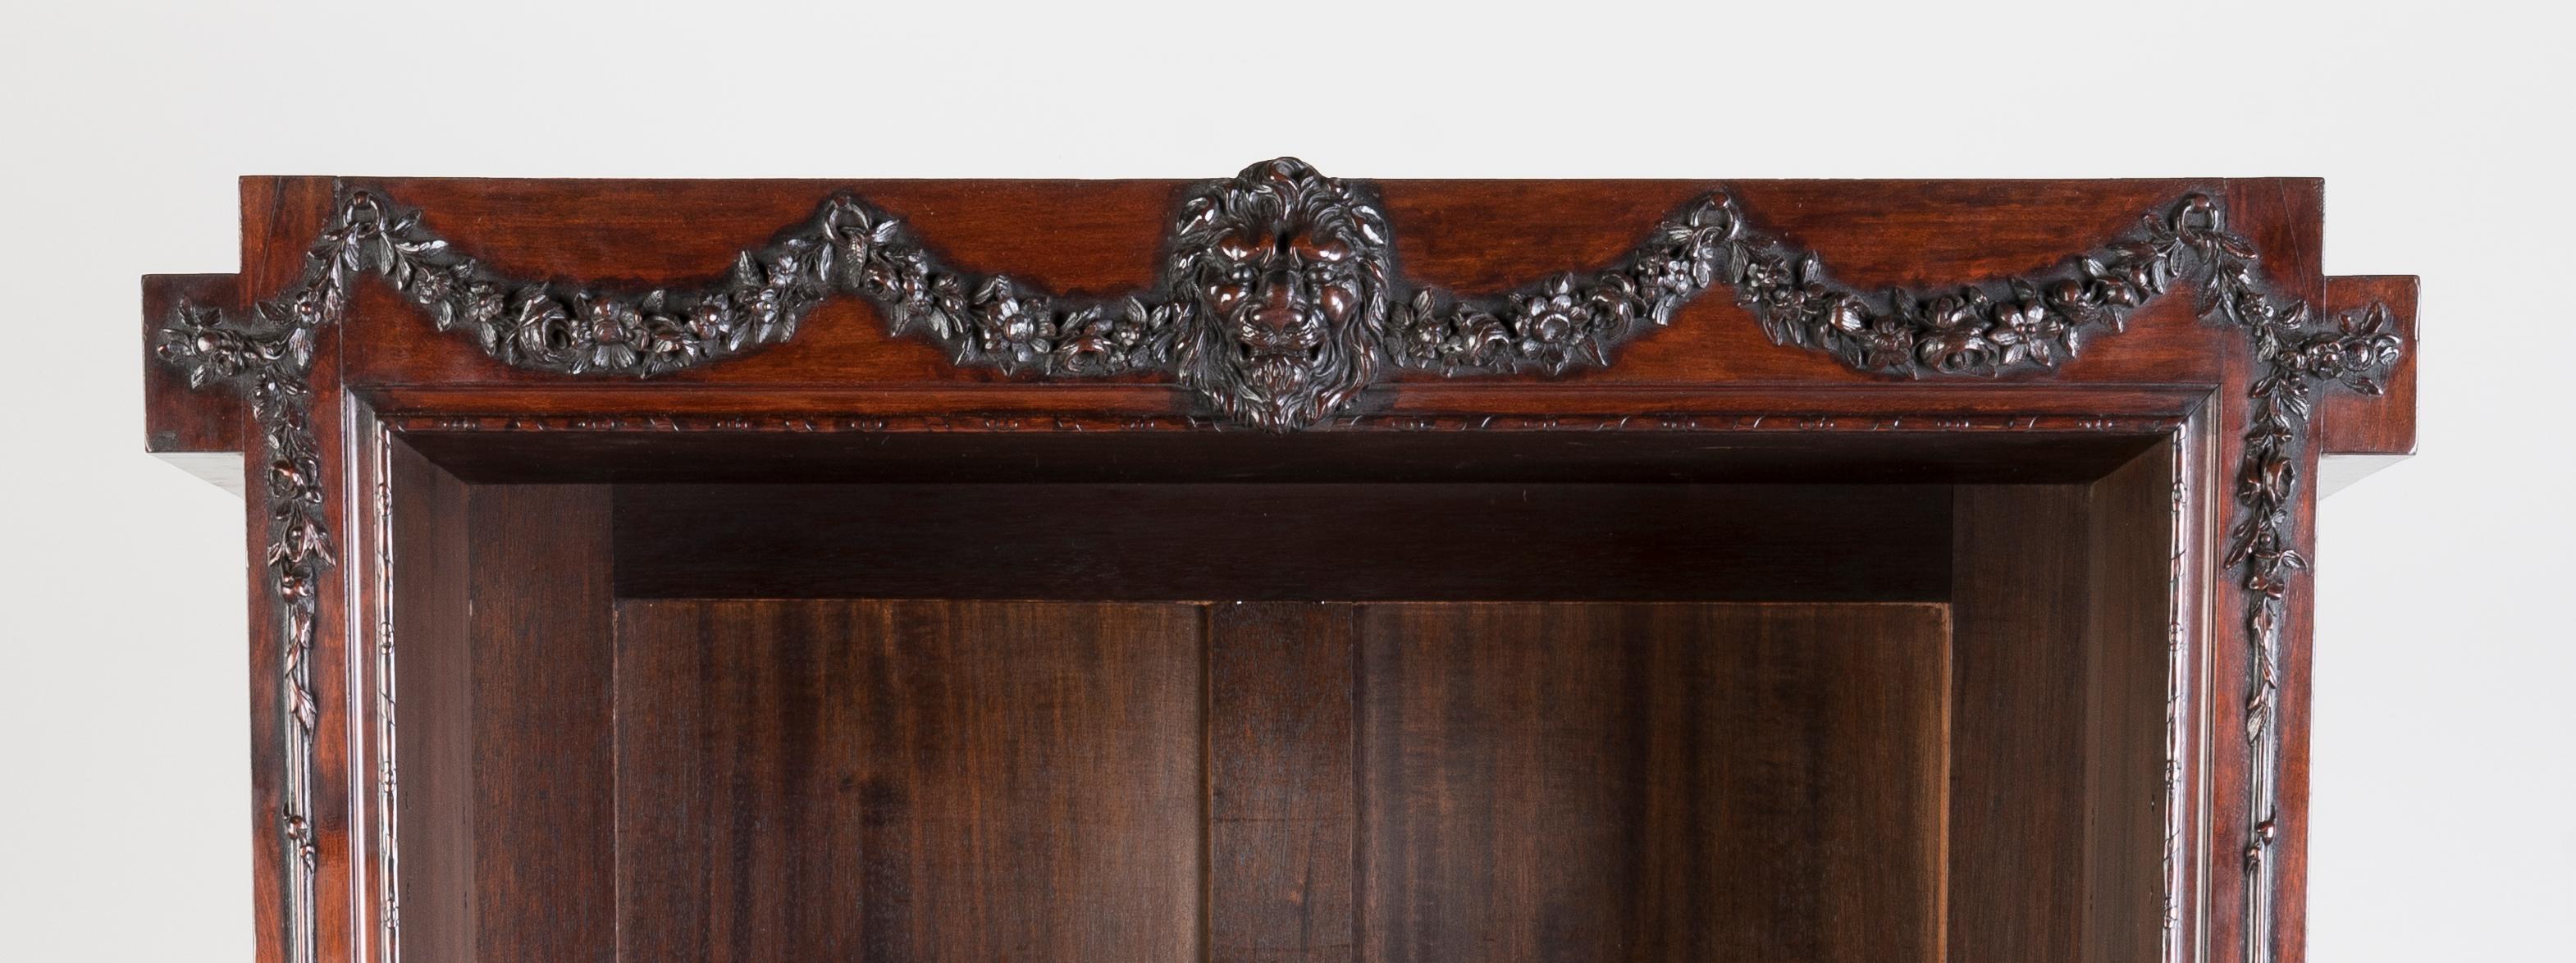 19th Century Carved Mahogany Cabinet Bookcase by H. Samuel in the Georgian Style For Sale 1